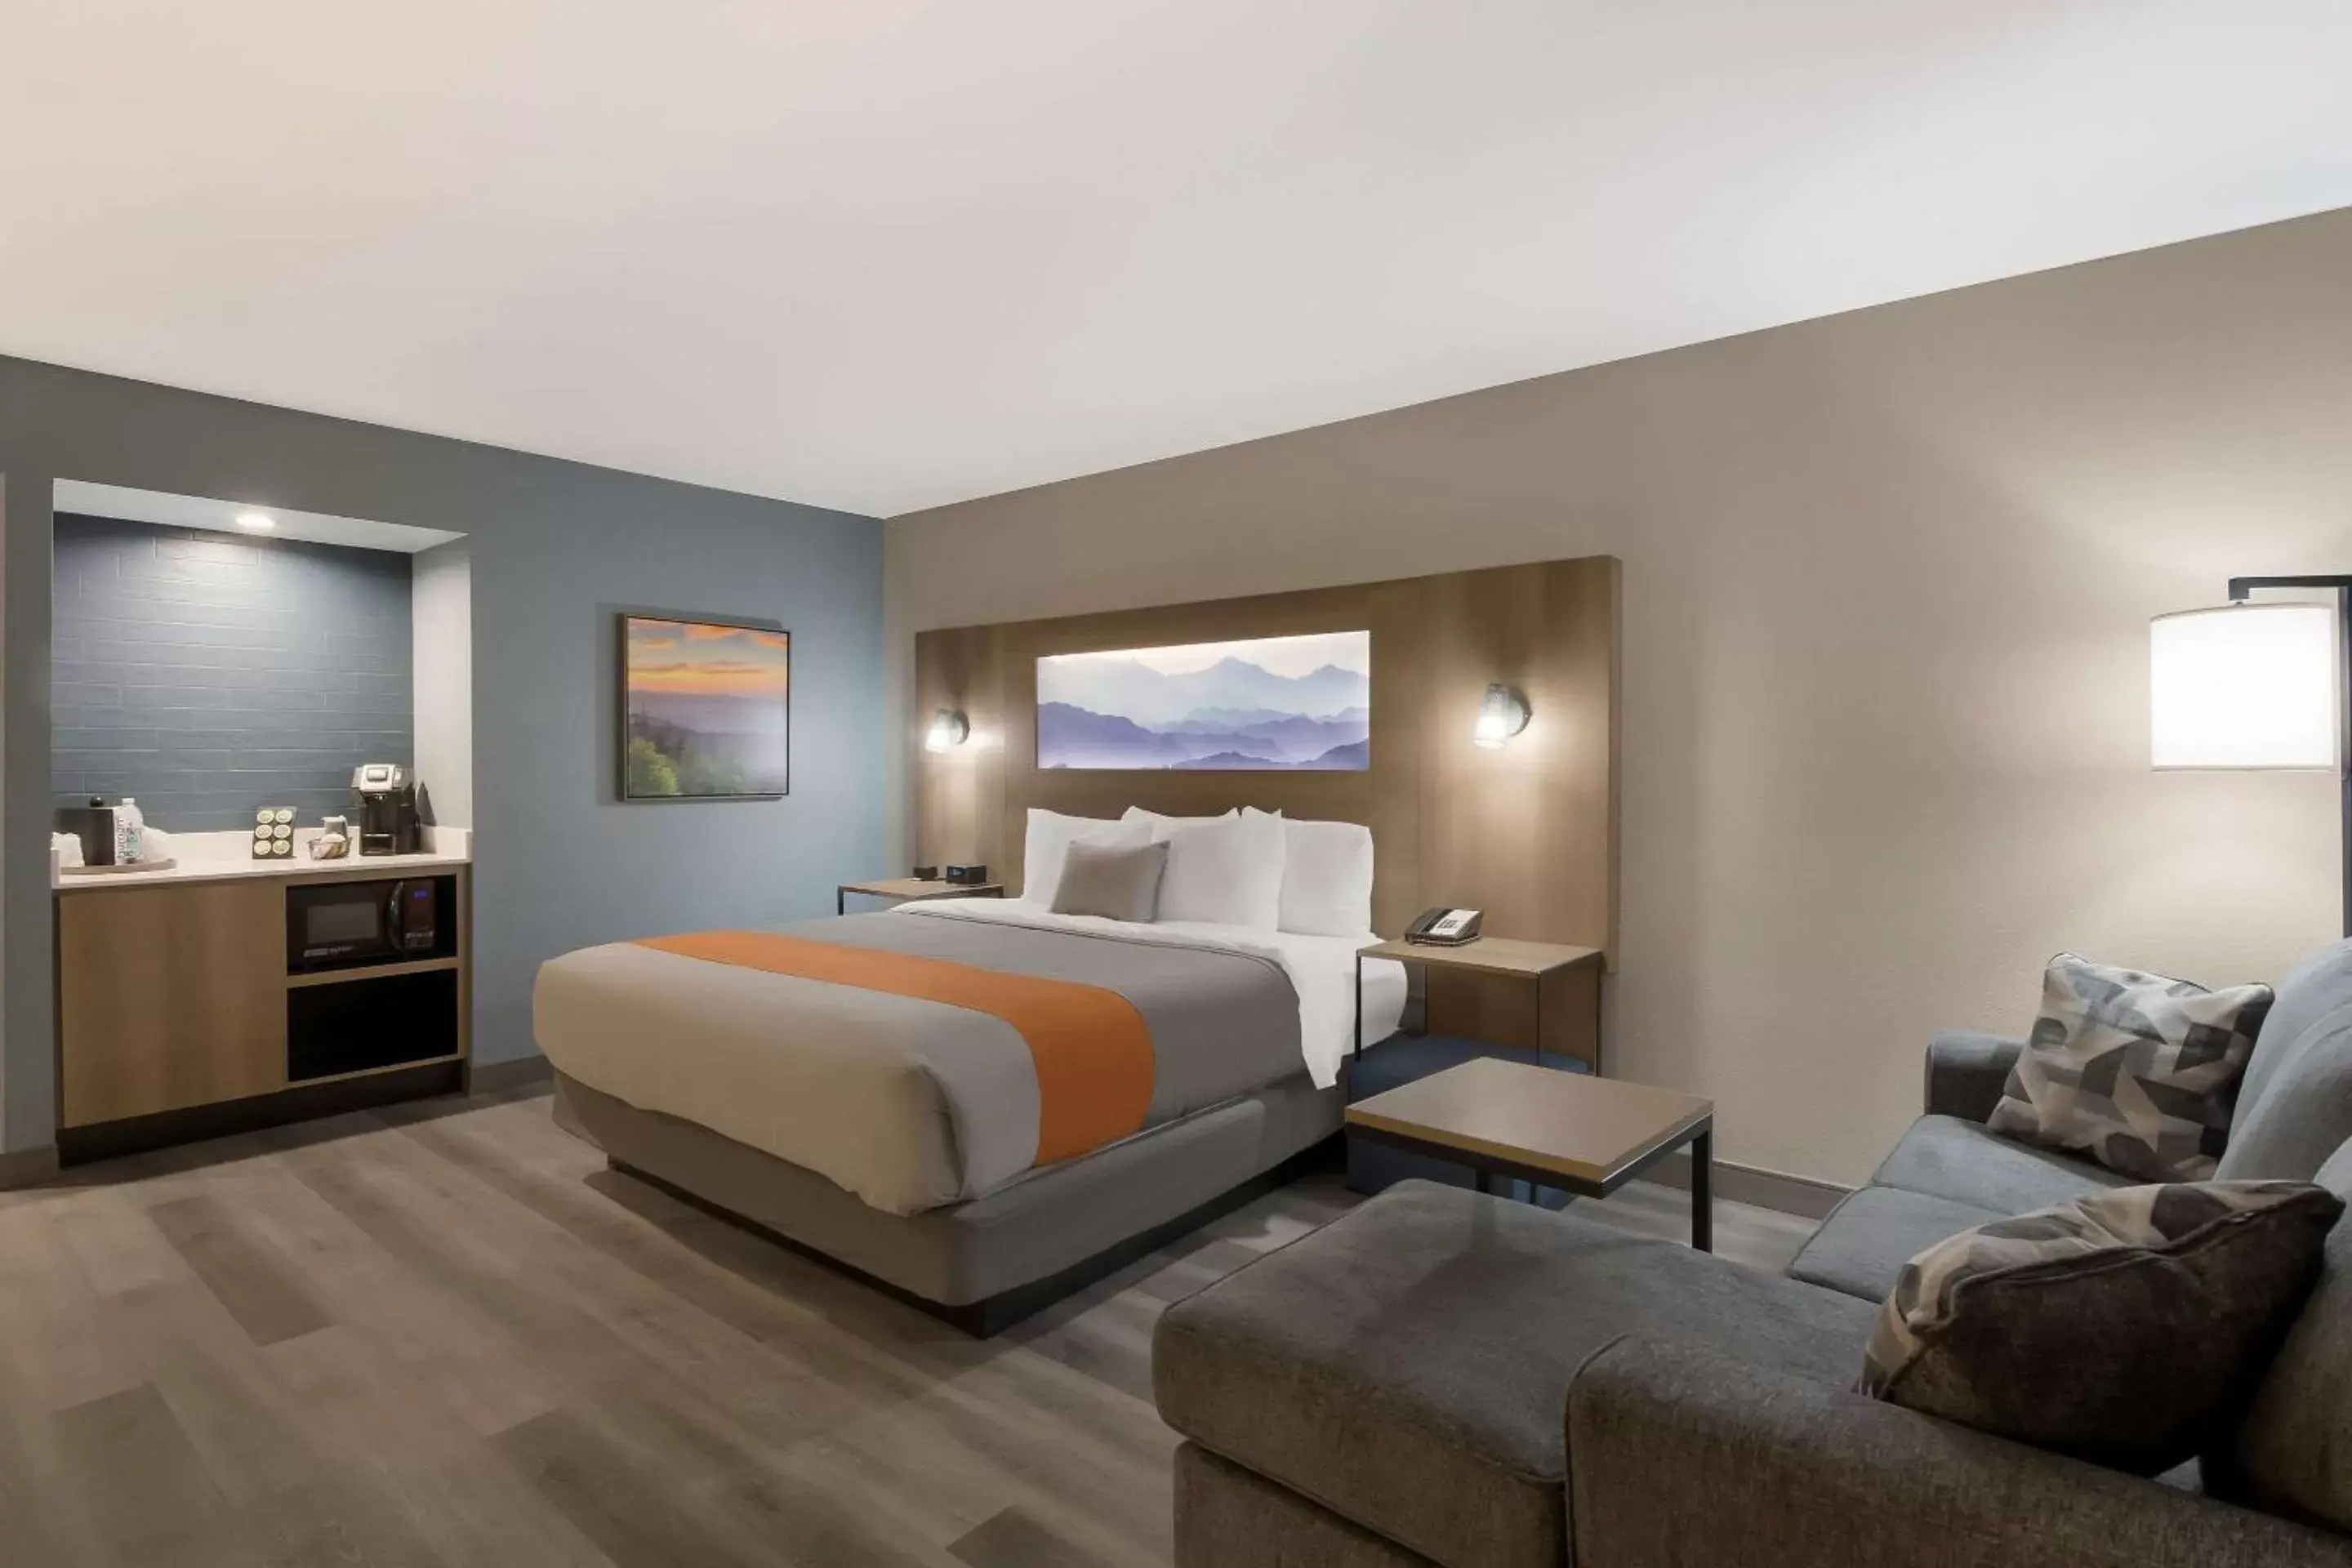 Bedroom in Graystone Lodge, Ascend Hotel Collection